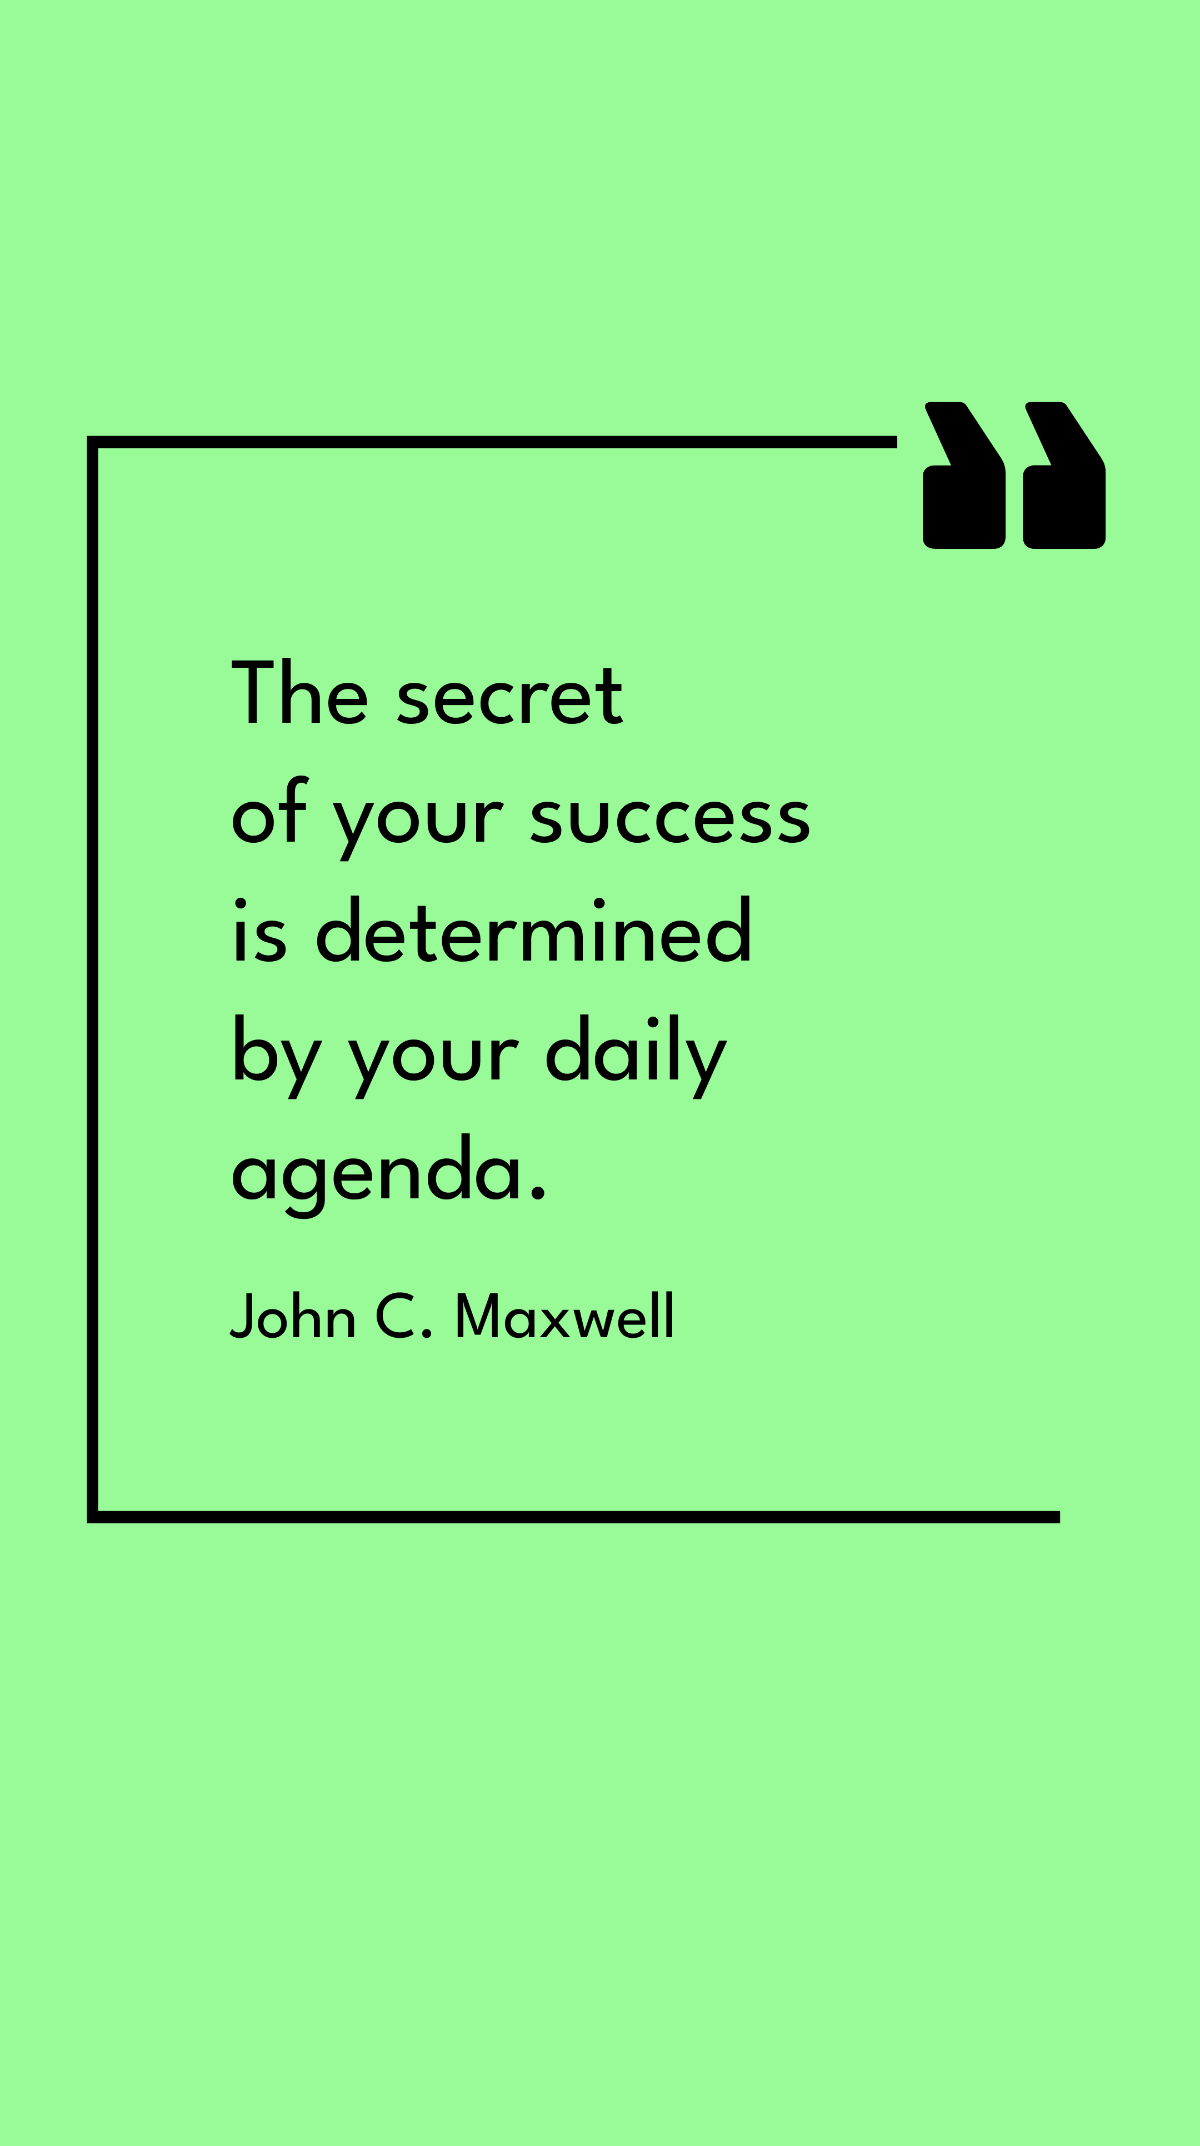 John C. Maxwell - The secret of your success is determined by your daily agenda. Template